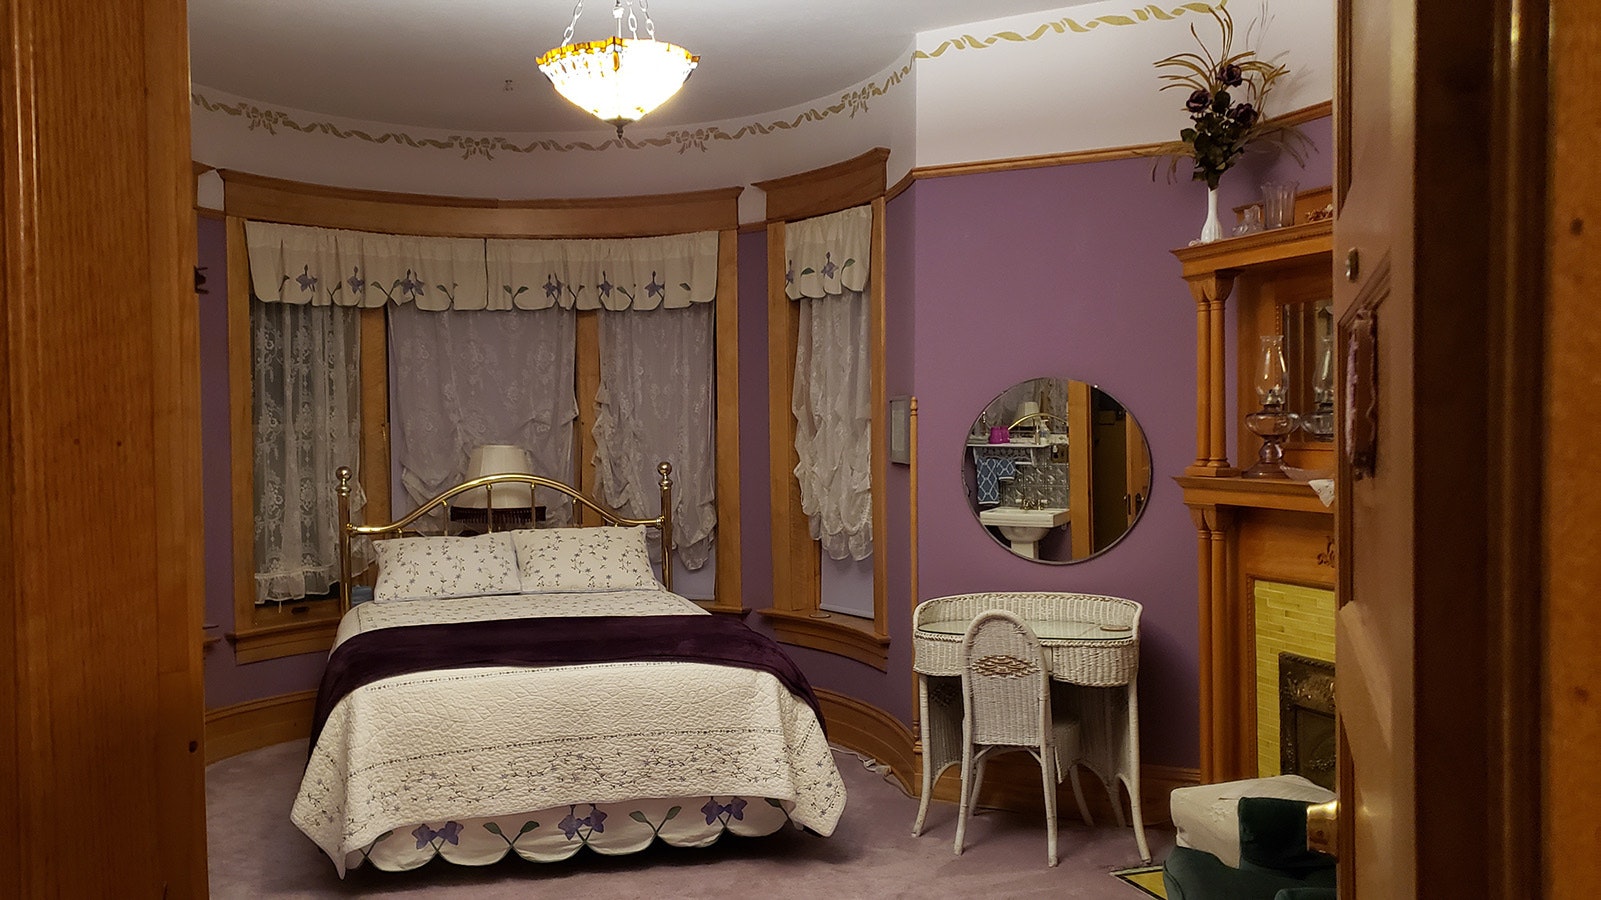 The Lavender Room in the Ferris Mansion is not available for an Airbnb stay. Some say they've seen a young child looking out the curved window when driving by the mansion.